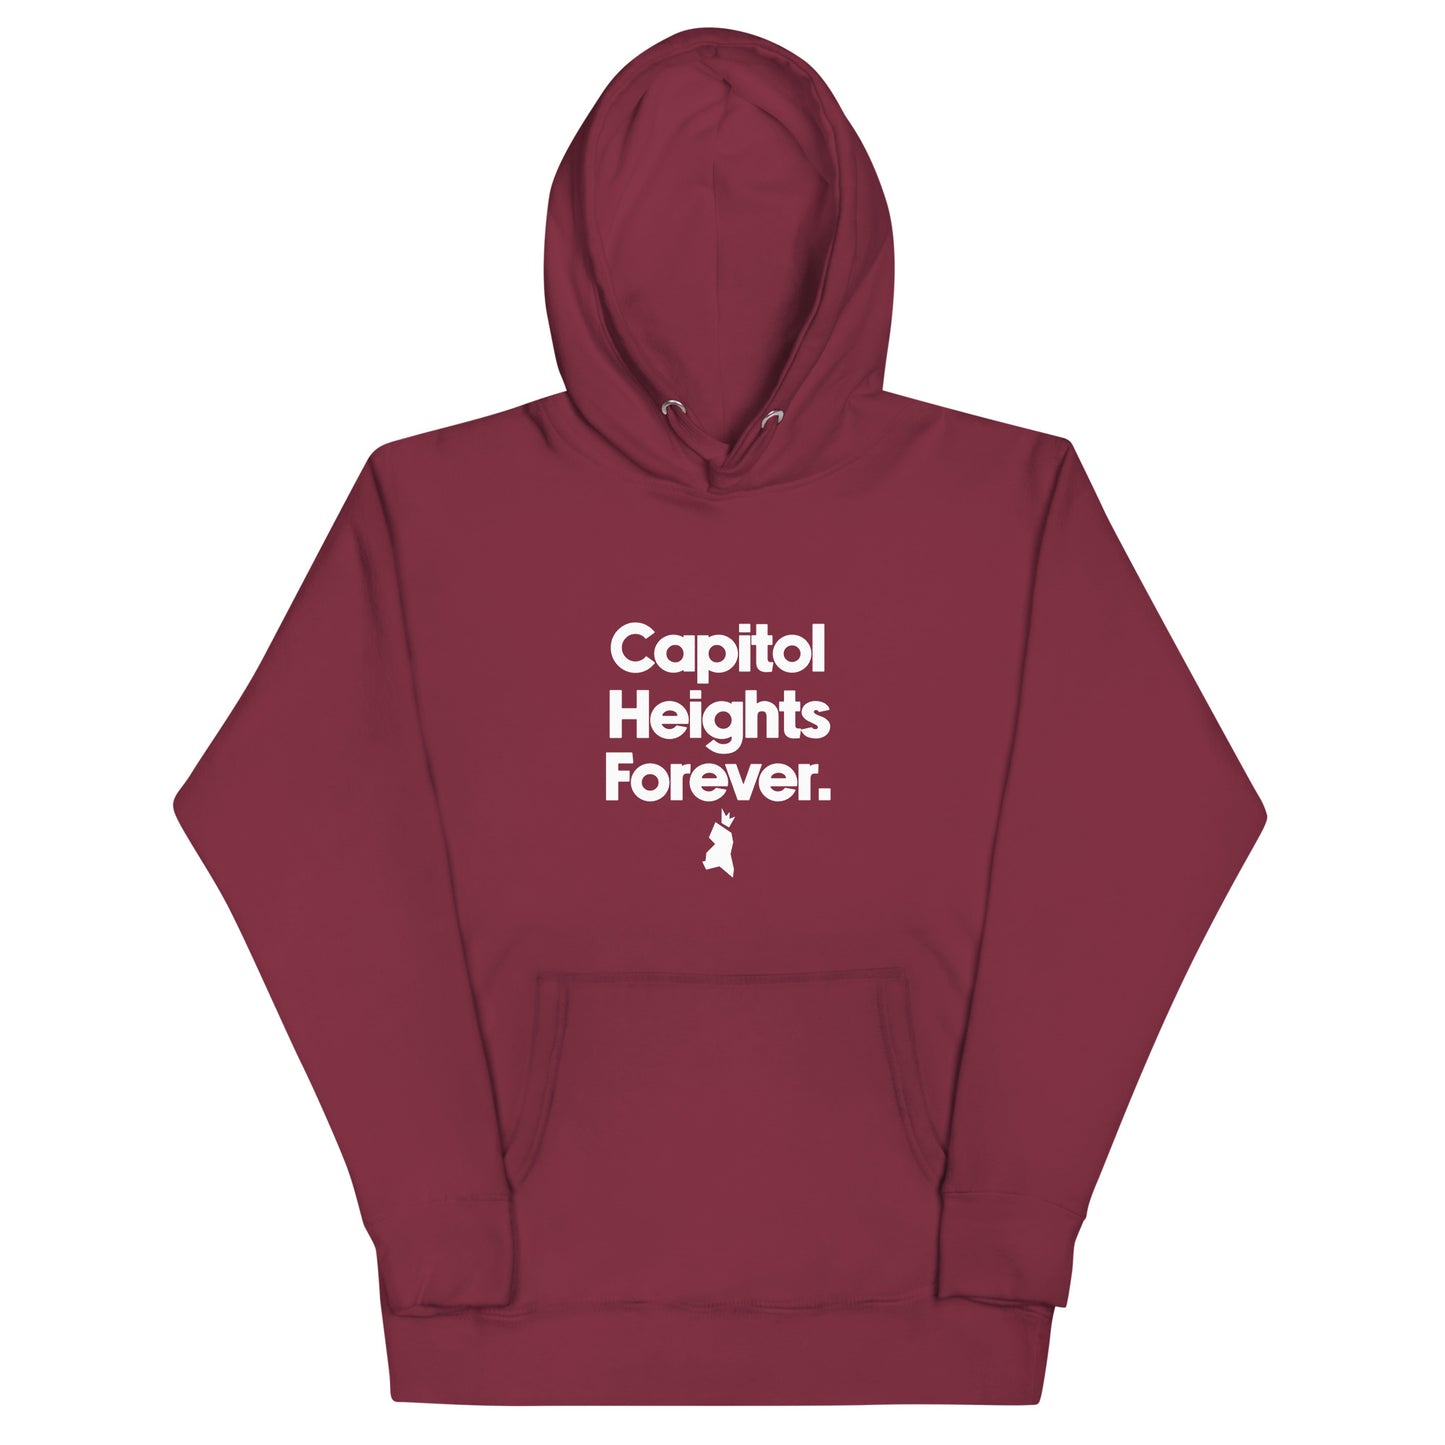 Capitol Heights Forever Unisex Hoodie